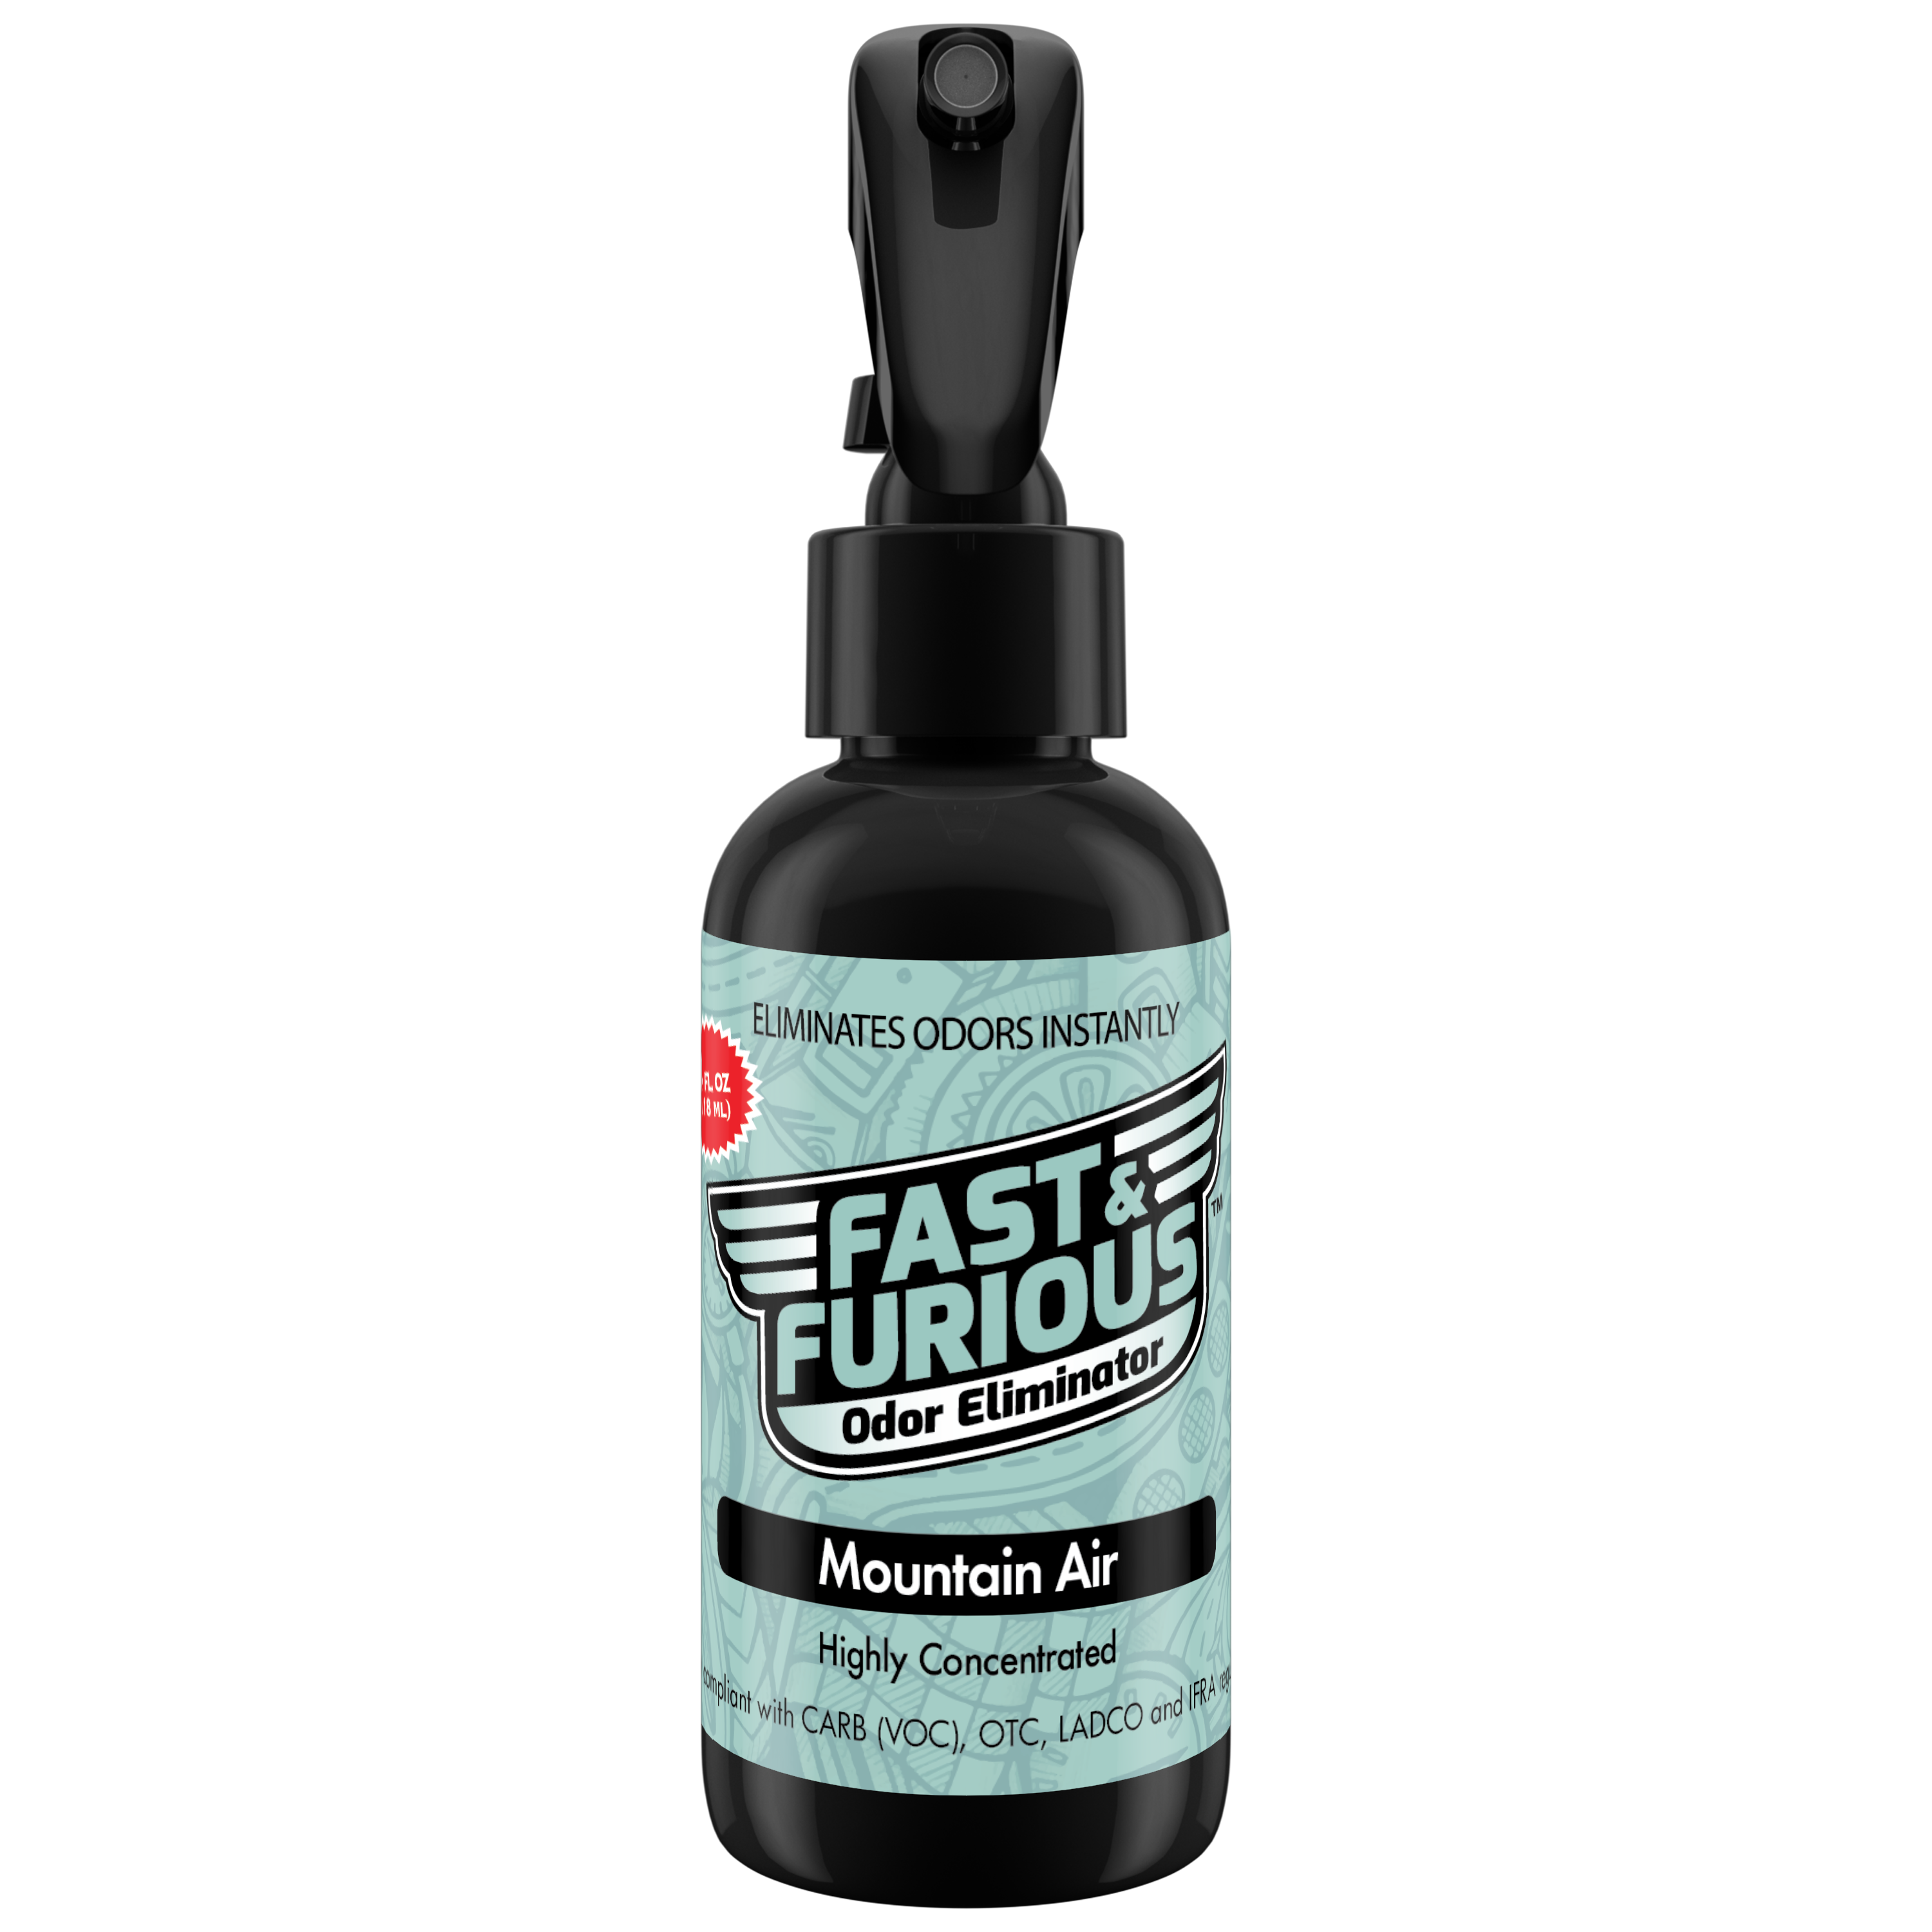 Fast and Furious Odor Eliminator - Mountain Air Scent